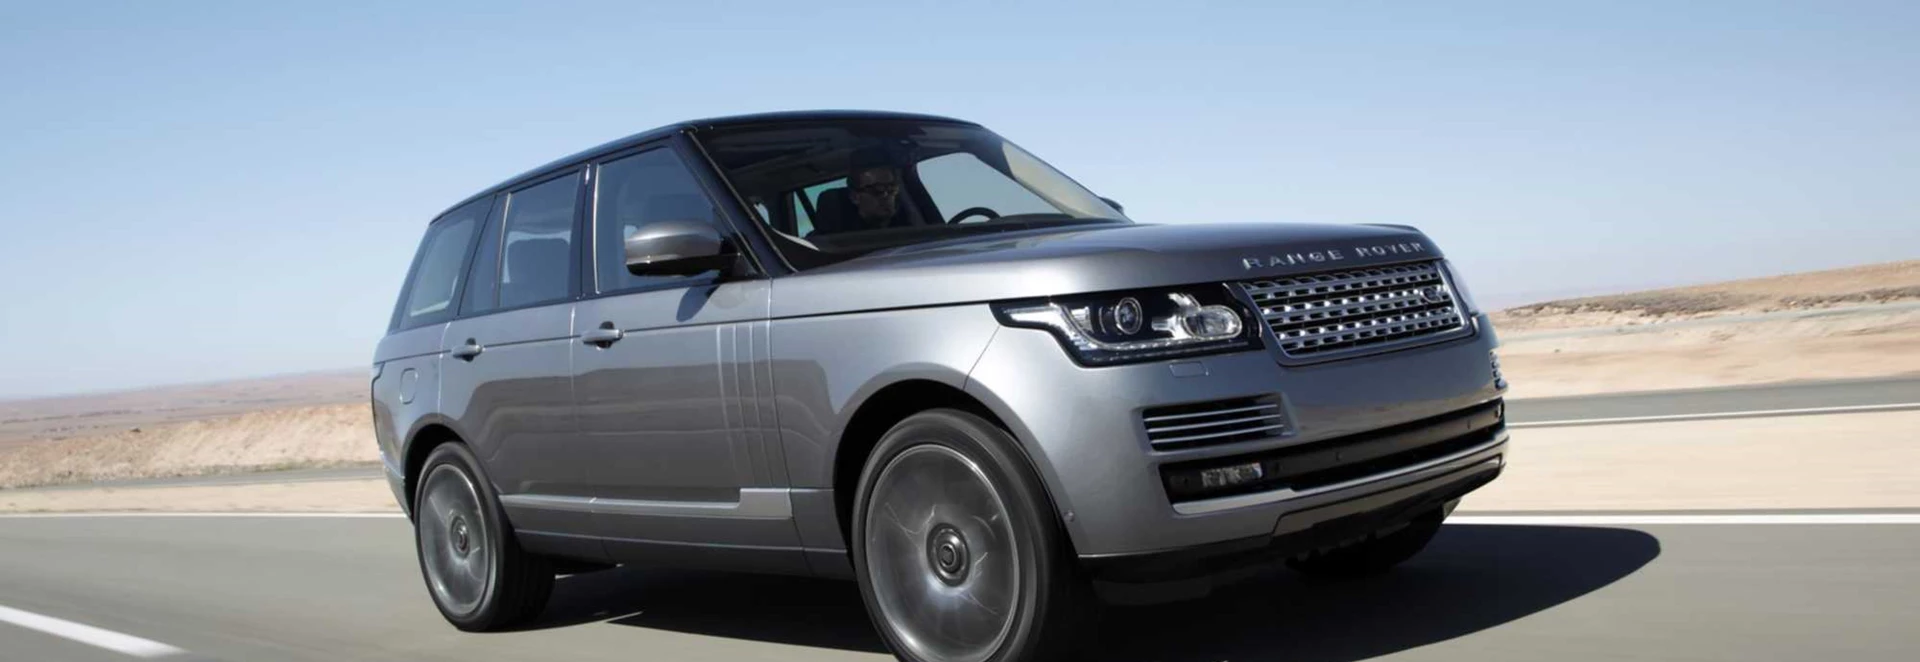 Land Rover Range Rover 4x4 review 